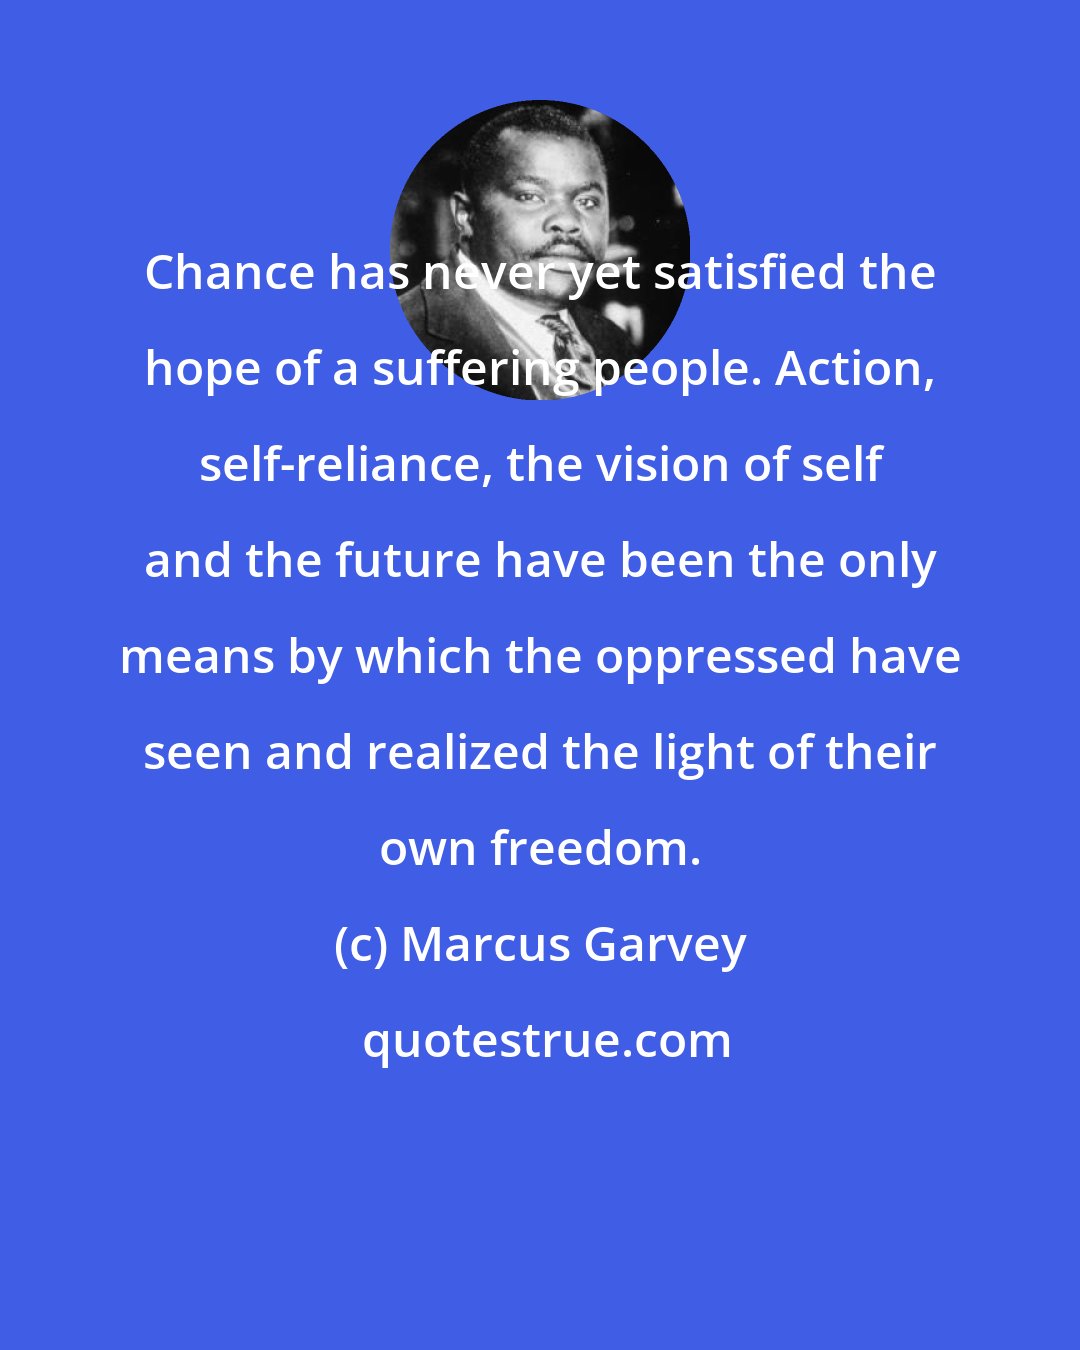 Marcus Garvey: Chance has never yet satisfied the hope of a suffering people. Action, self-reliance, the vision of self and the future have been the only means by which the oppressed have seen and realized the light of their own freedom.